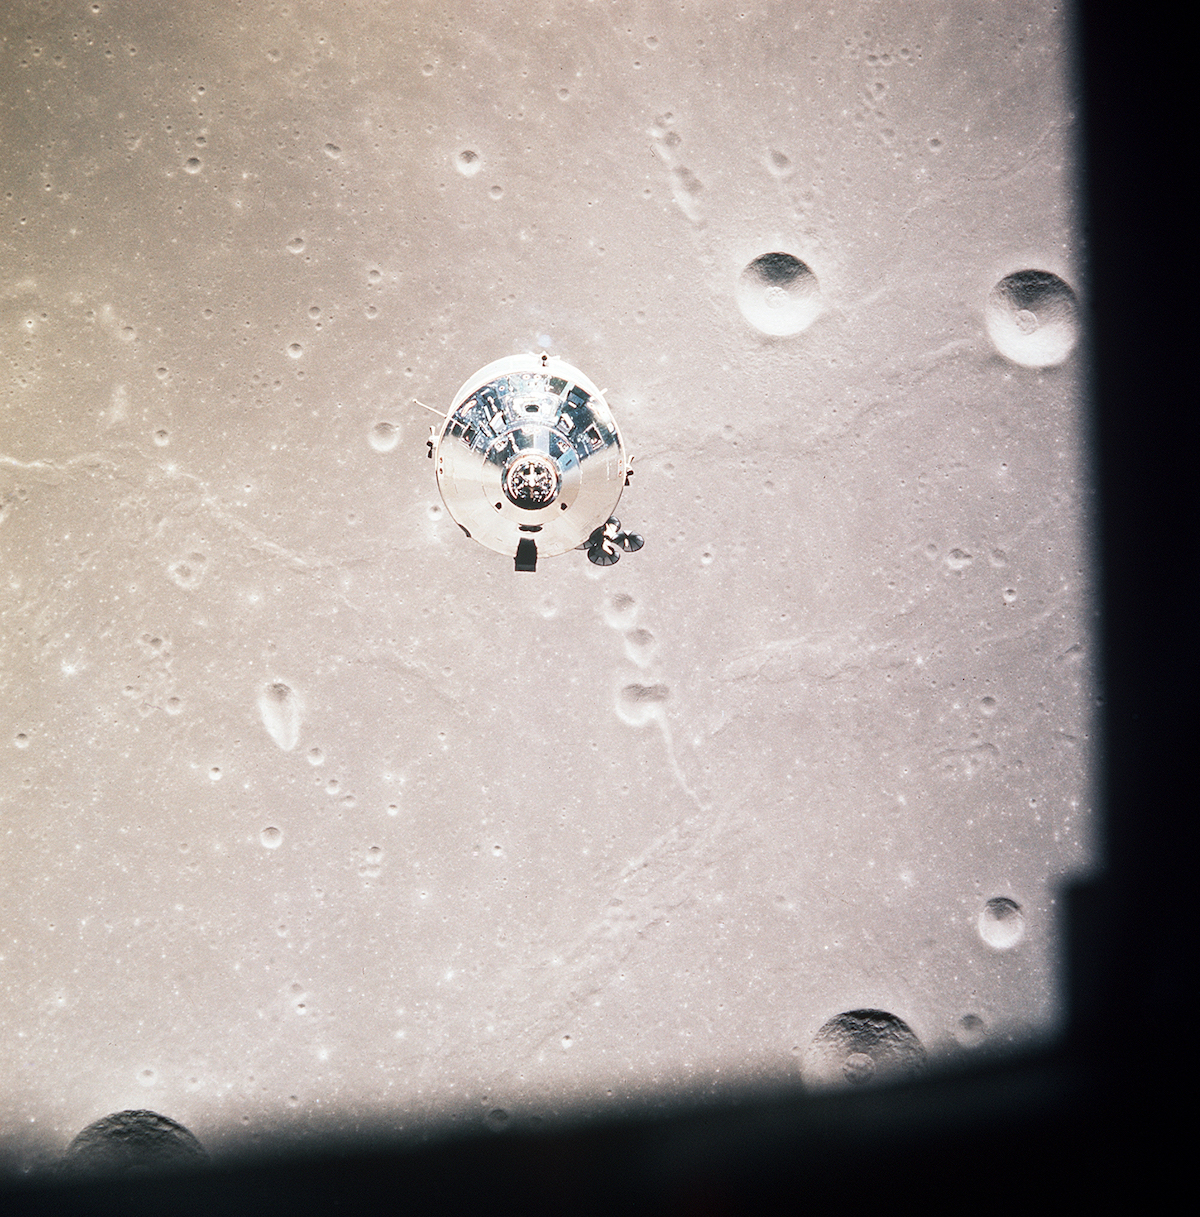 reflective metal spacecraft above the cratered lunar surface